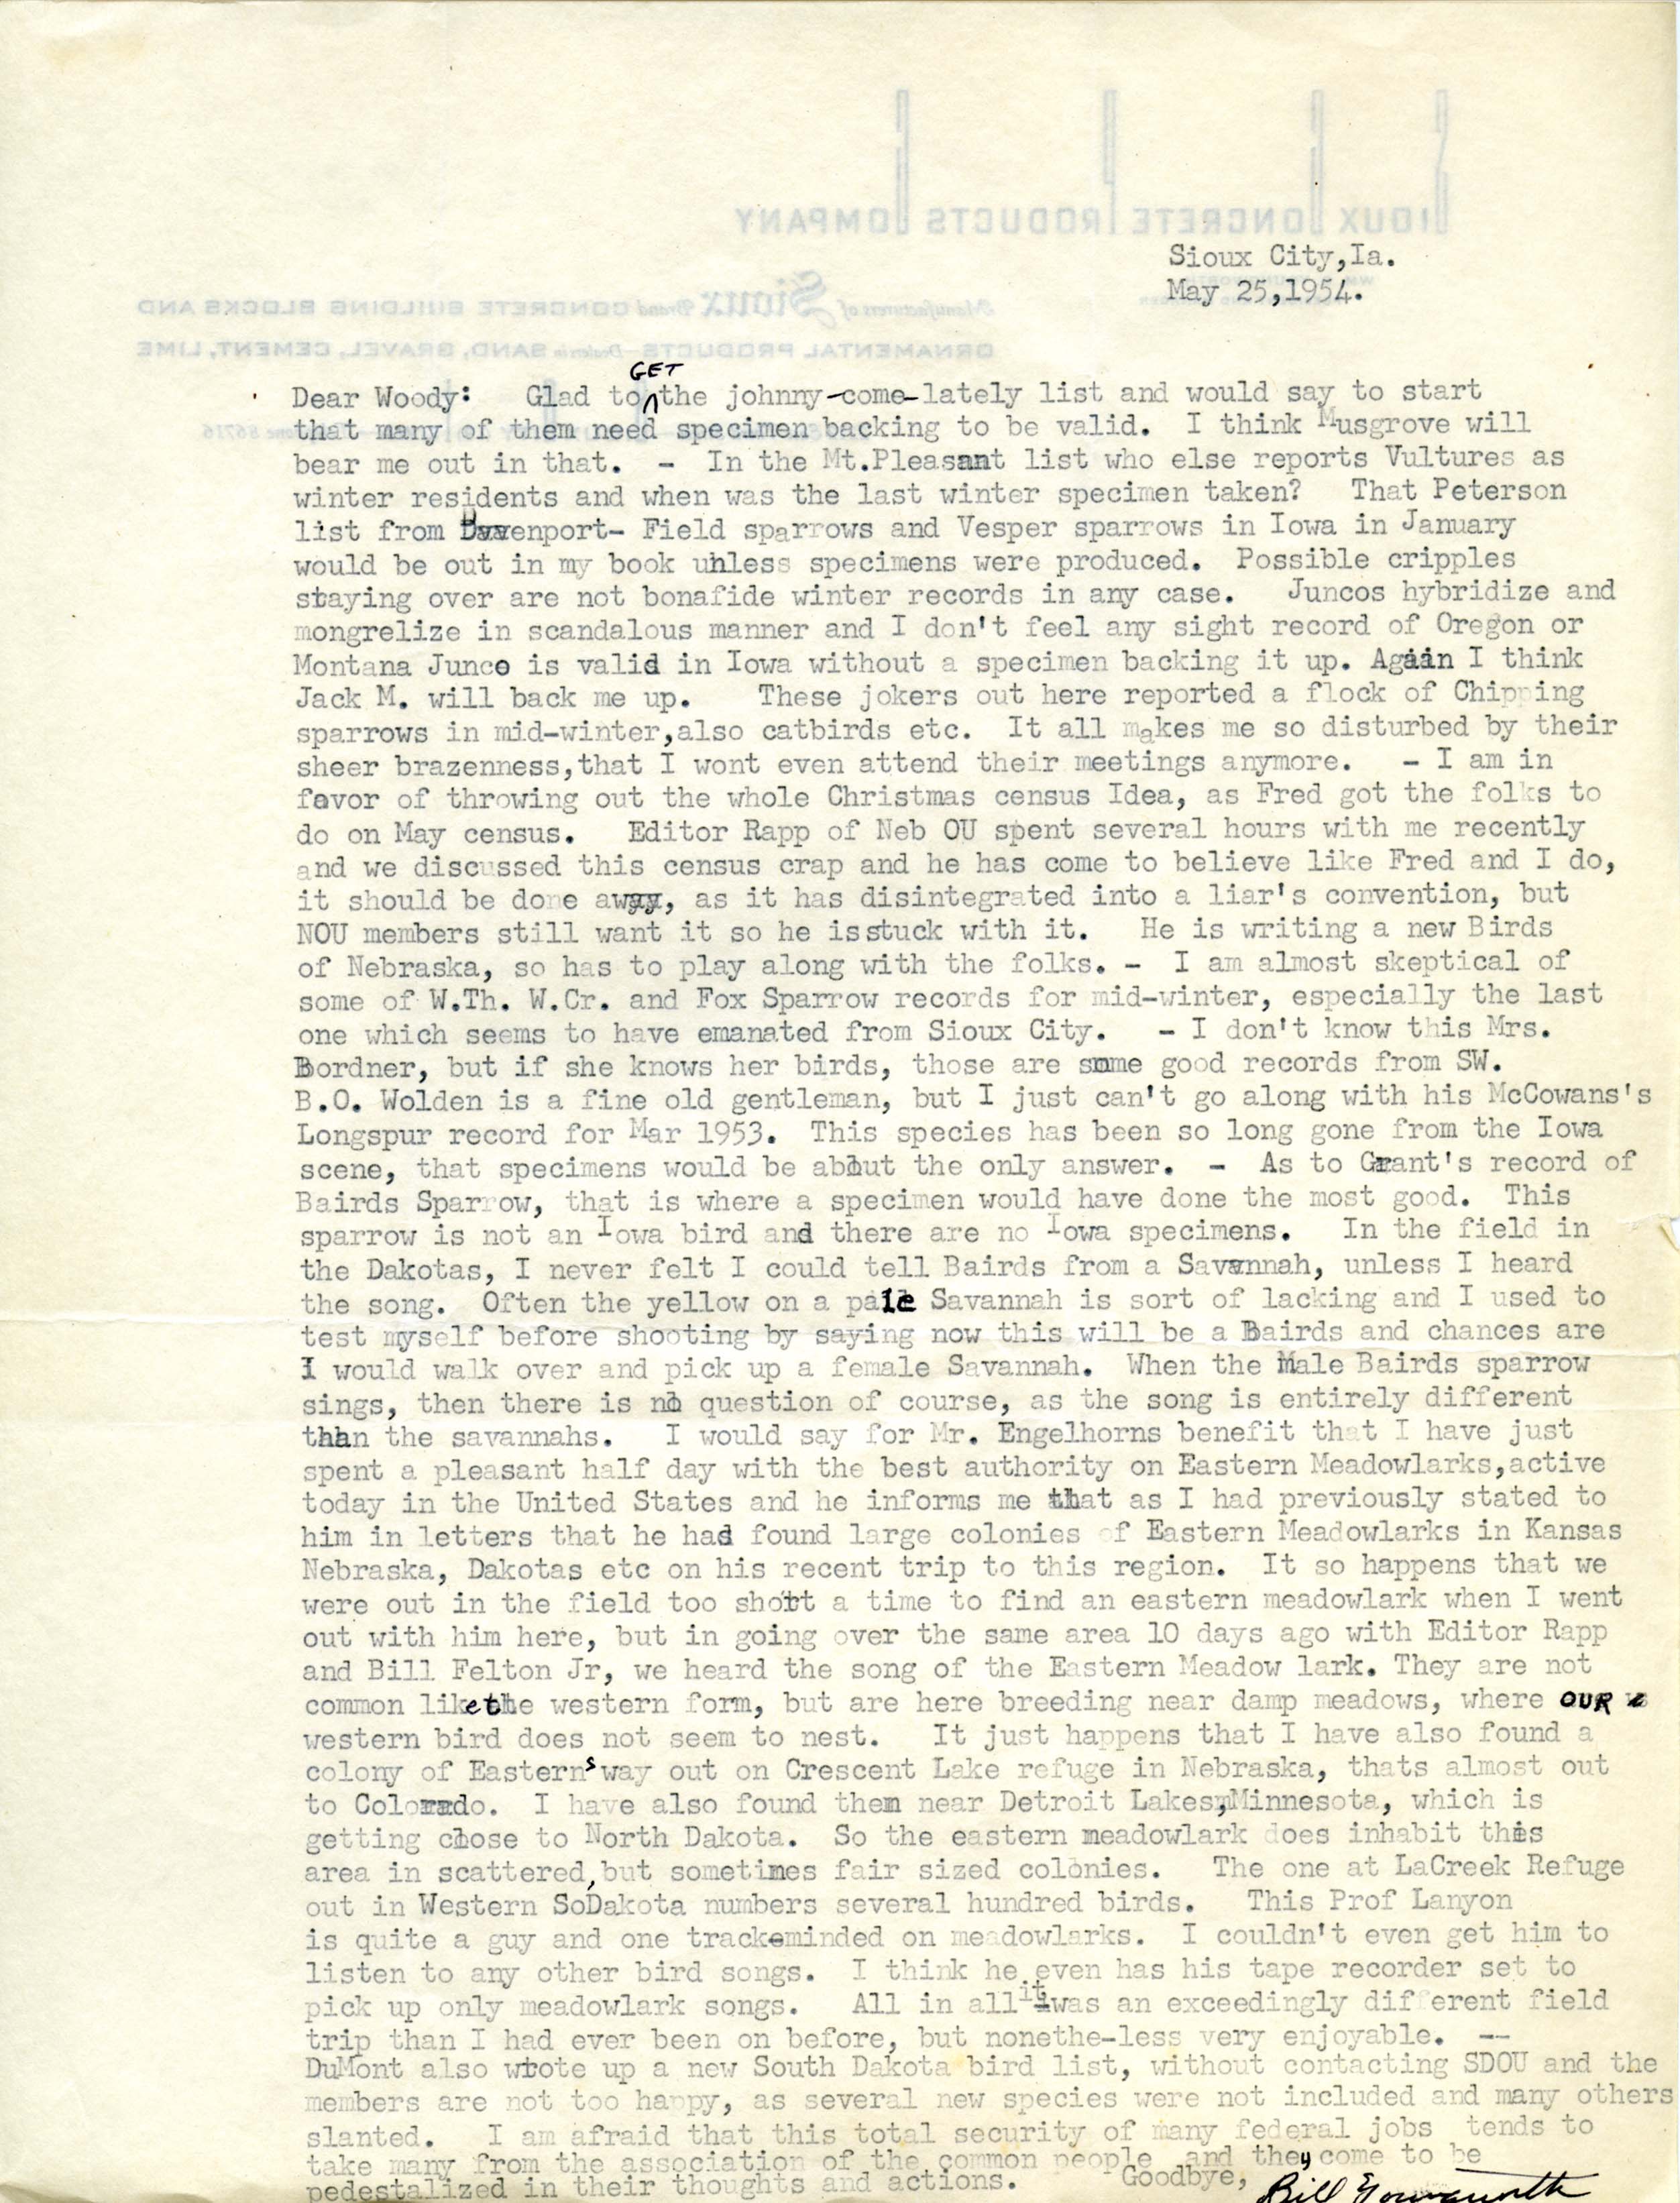 Bill Youngworth letter to Woodward Hart Brown regarding dubious Christmas census reports, May 25, 1954